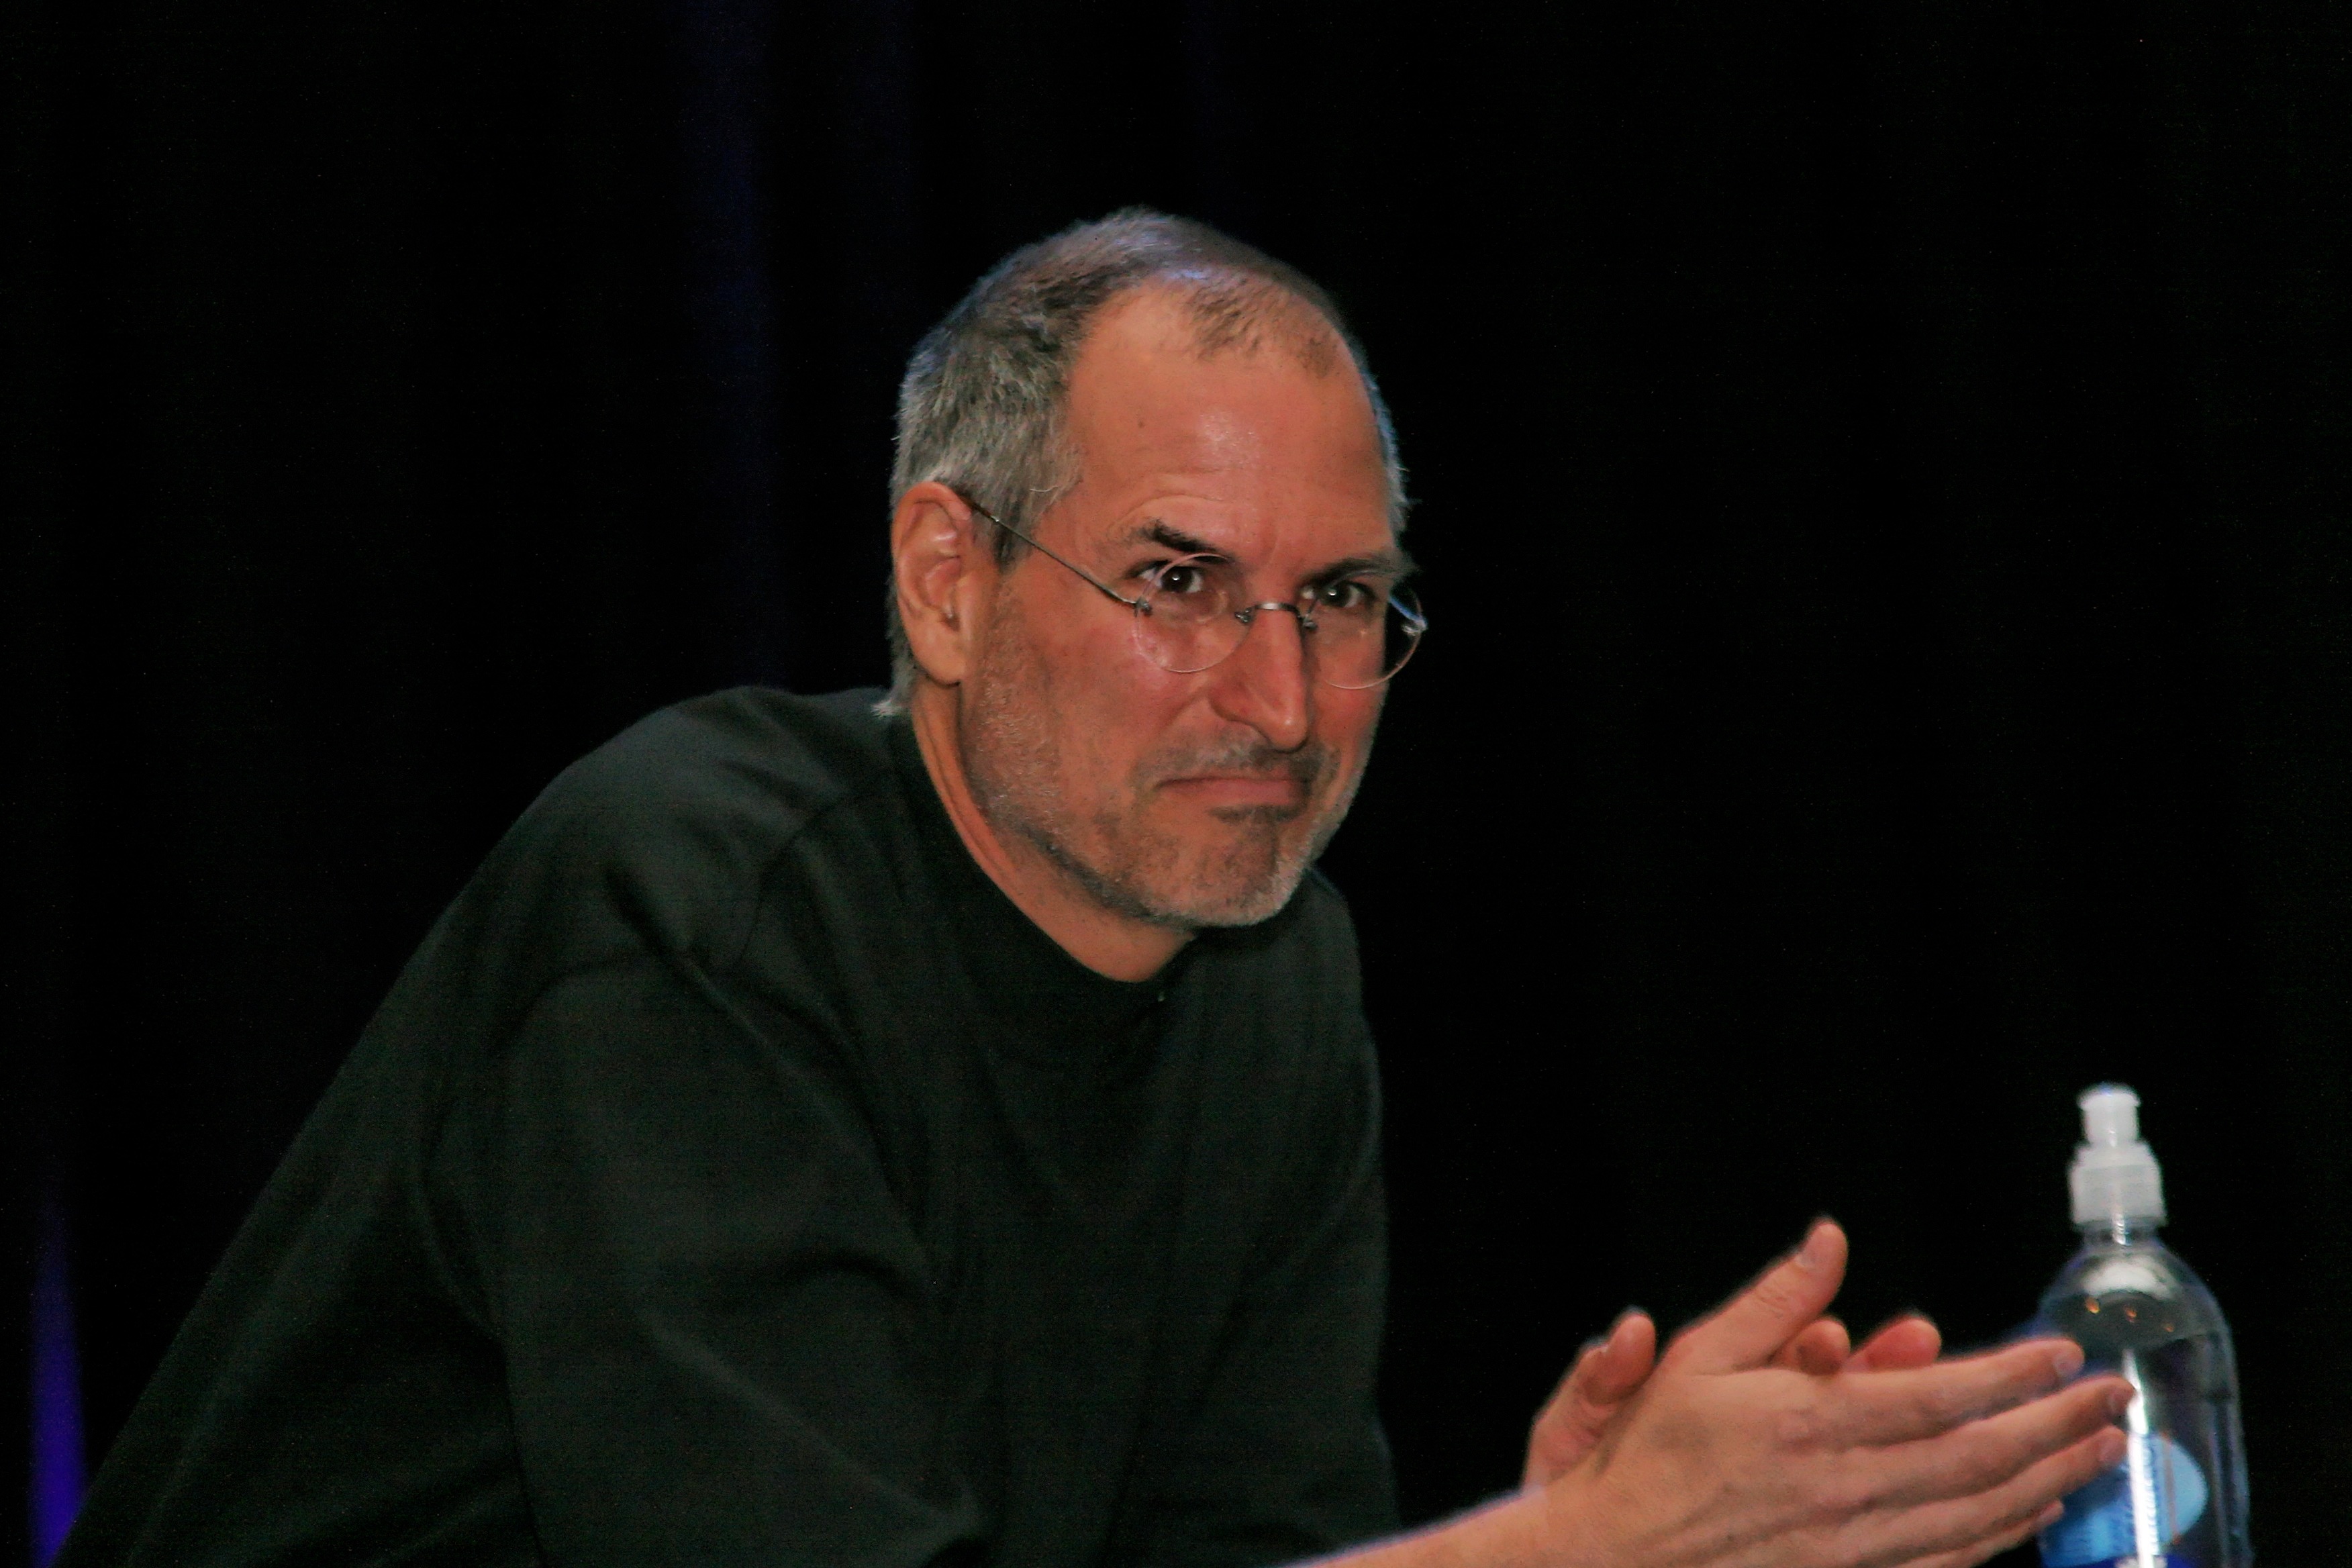 Steve Jobs watches as he hands over the stage